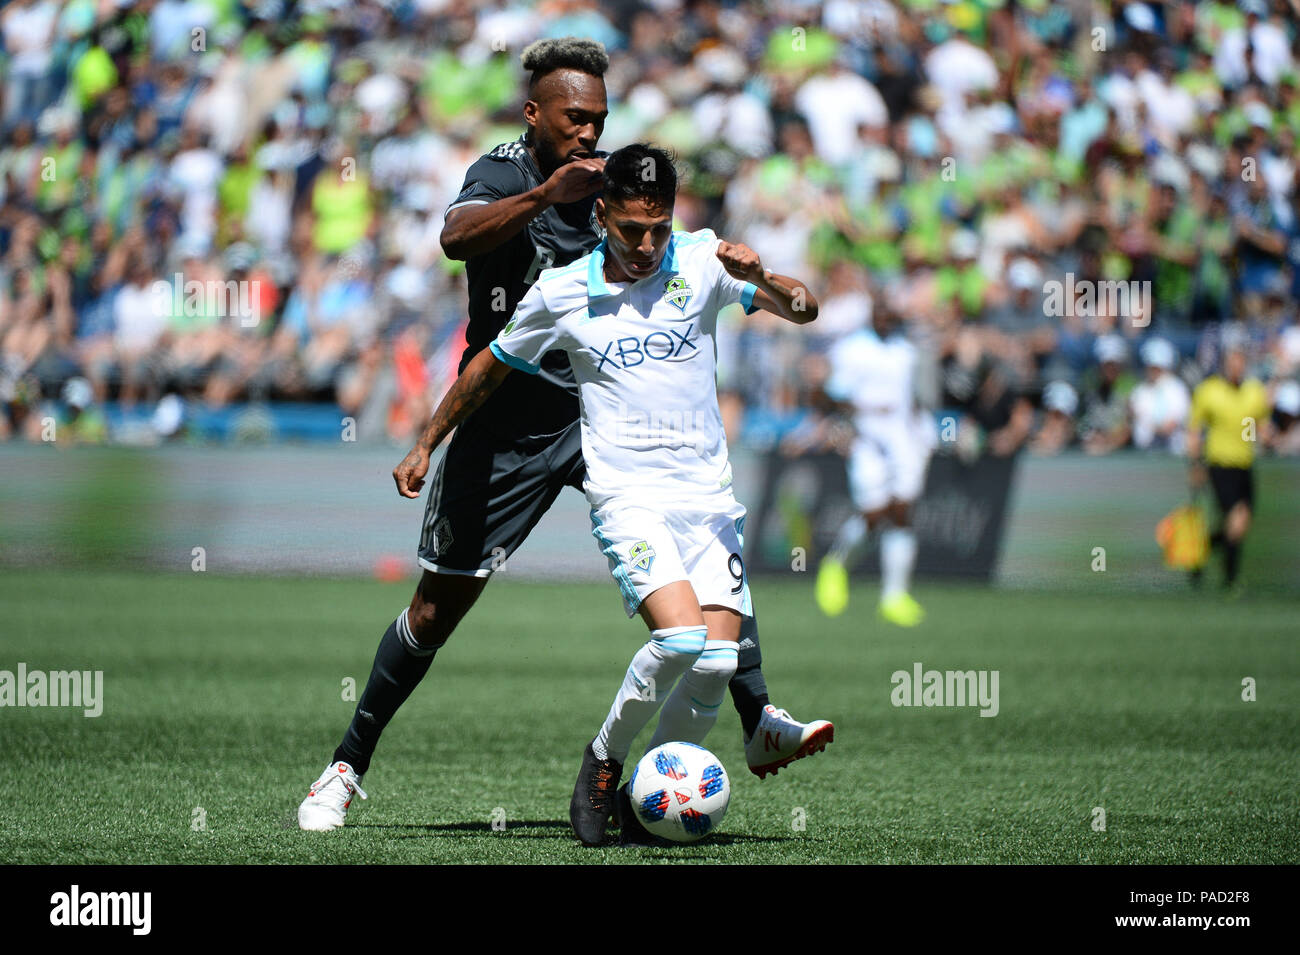 Seattle, Washington, USA. 21st July, 2018. The Whitecaps KENDALL WASTON (4) defends against recently signed RAUL RUIDIAZ (9) as the Vancouver Whitecaps visit the Seattle Sounders for an MLS match at Century Link Field in Seattle, WA. Credit: Jeff Halstead/ZUMA Wire/Alamy Live News Stock Photo